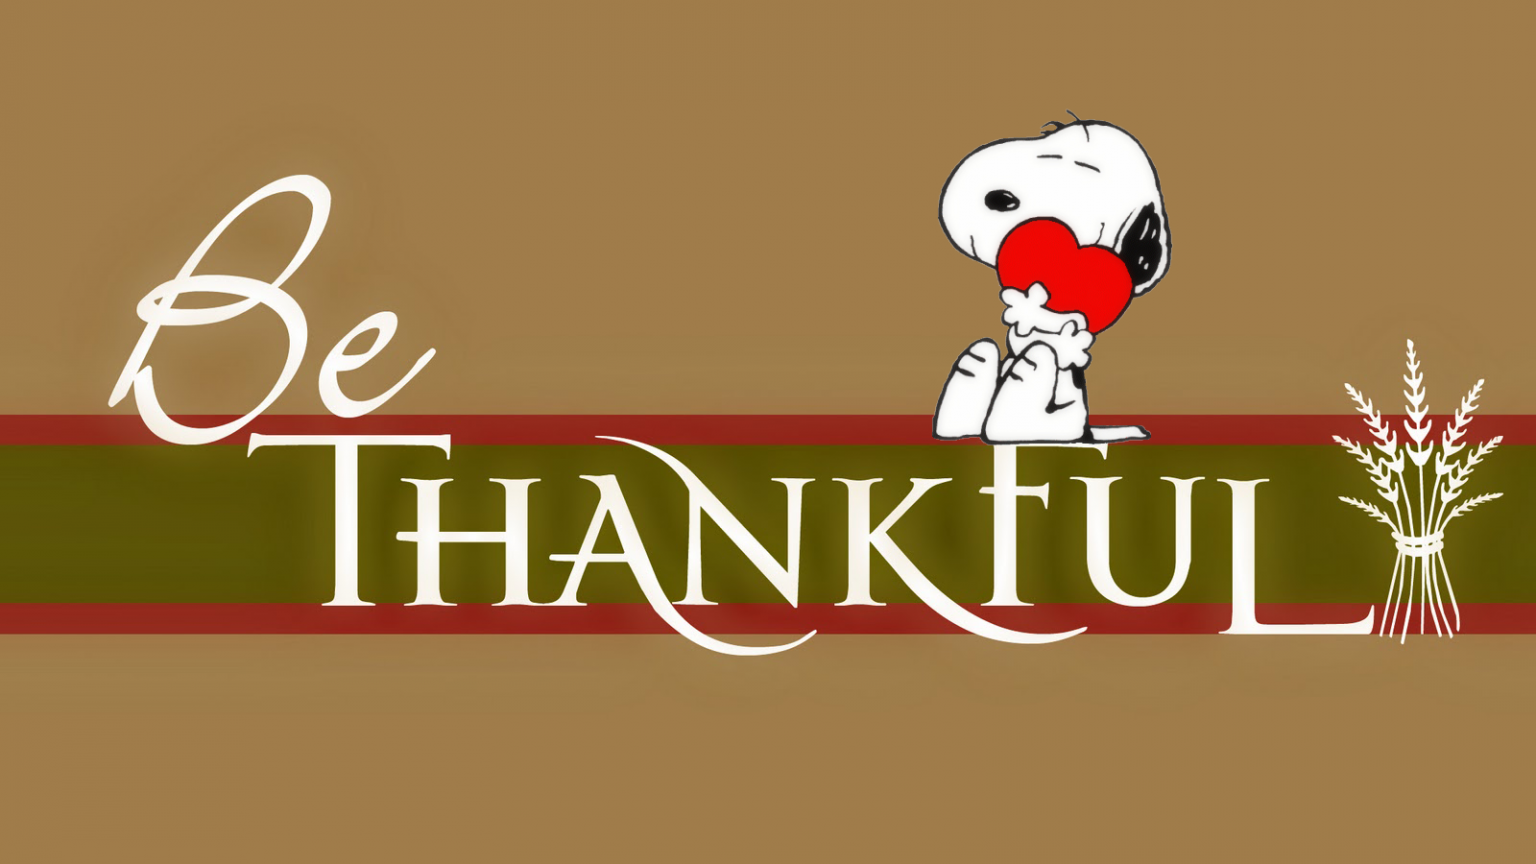 Free download Pics Gifs Photographs Peanuts Snoopy Thanksgiving wallpaper [1600x1200] for your Desktop, Mobile & Tablet. Explore Peanuts Autumn Wallpaper. Peanuts Thanksgiving Wallpaper, Peanuts Christmas Wallpaper, Charlie Brown